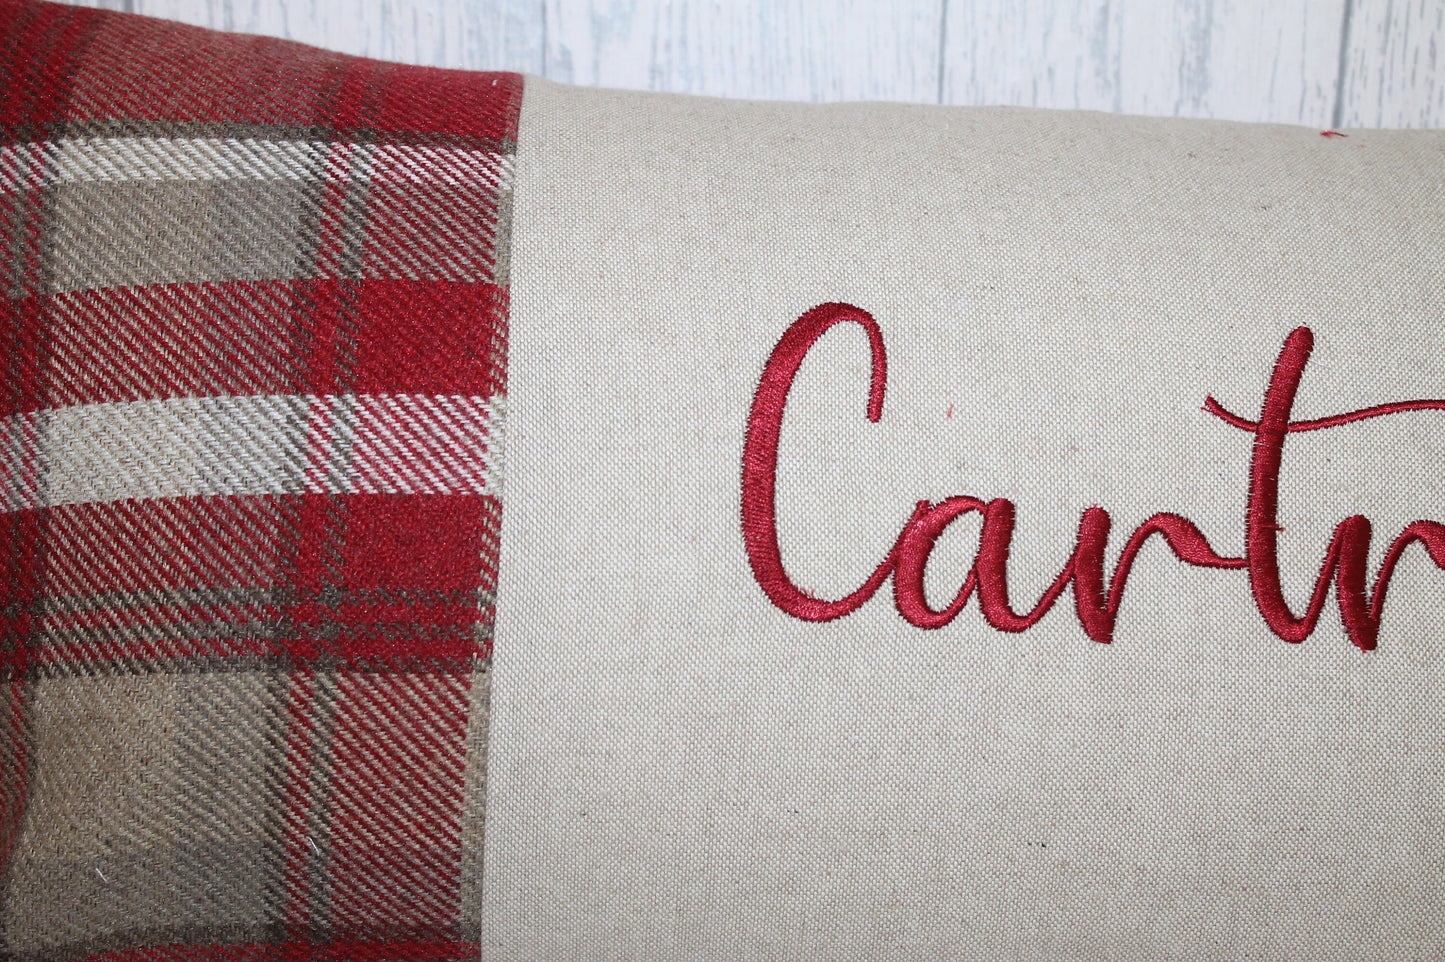 Cartref Cushion-Personalised Cushion- Quote Cushion- Red Check Wool touch and Cream long cushion. Personalised cushion- Handmade cushion